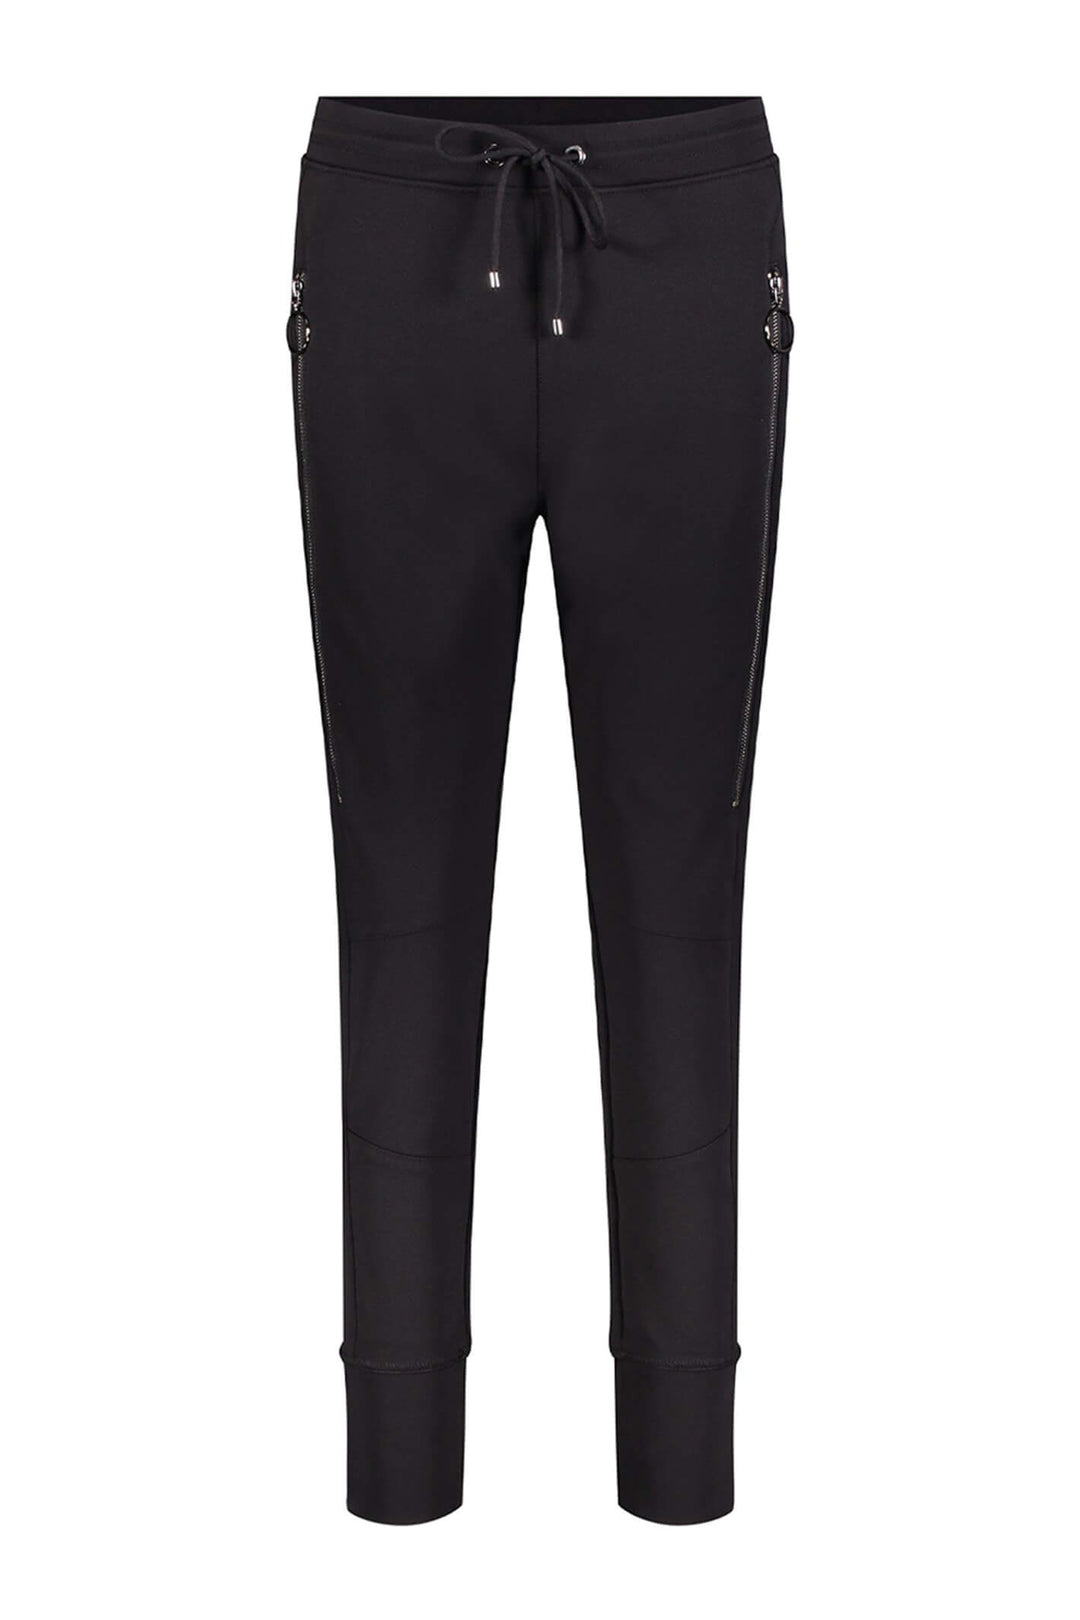 MAC Future Sporty Pull-On Black Trousers Front